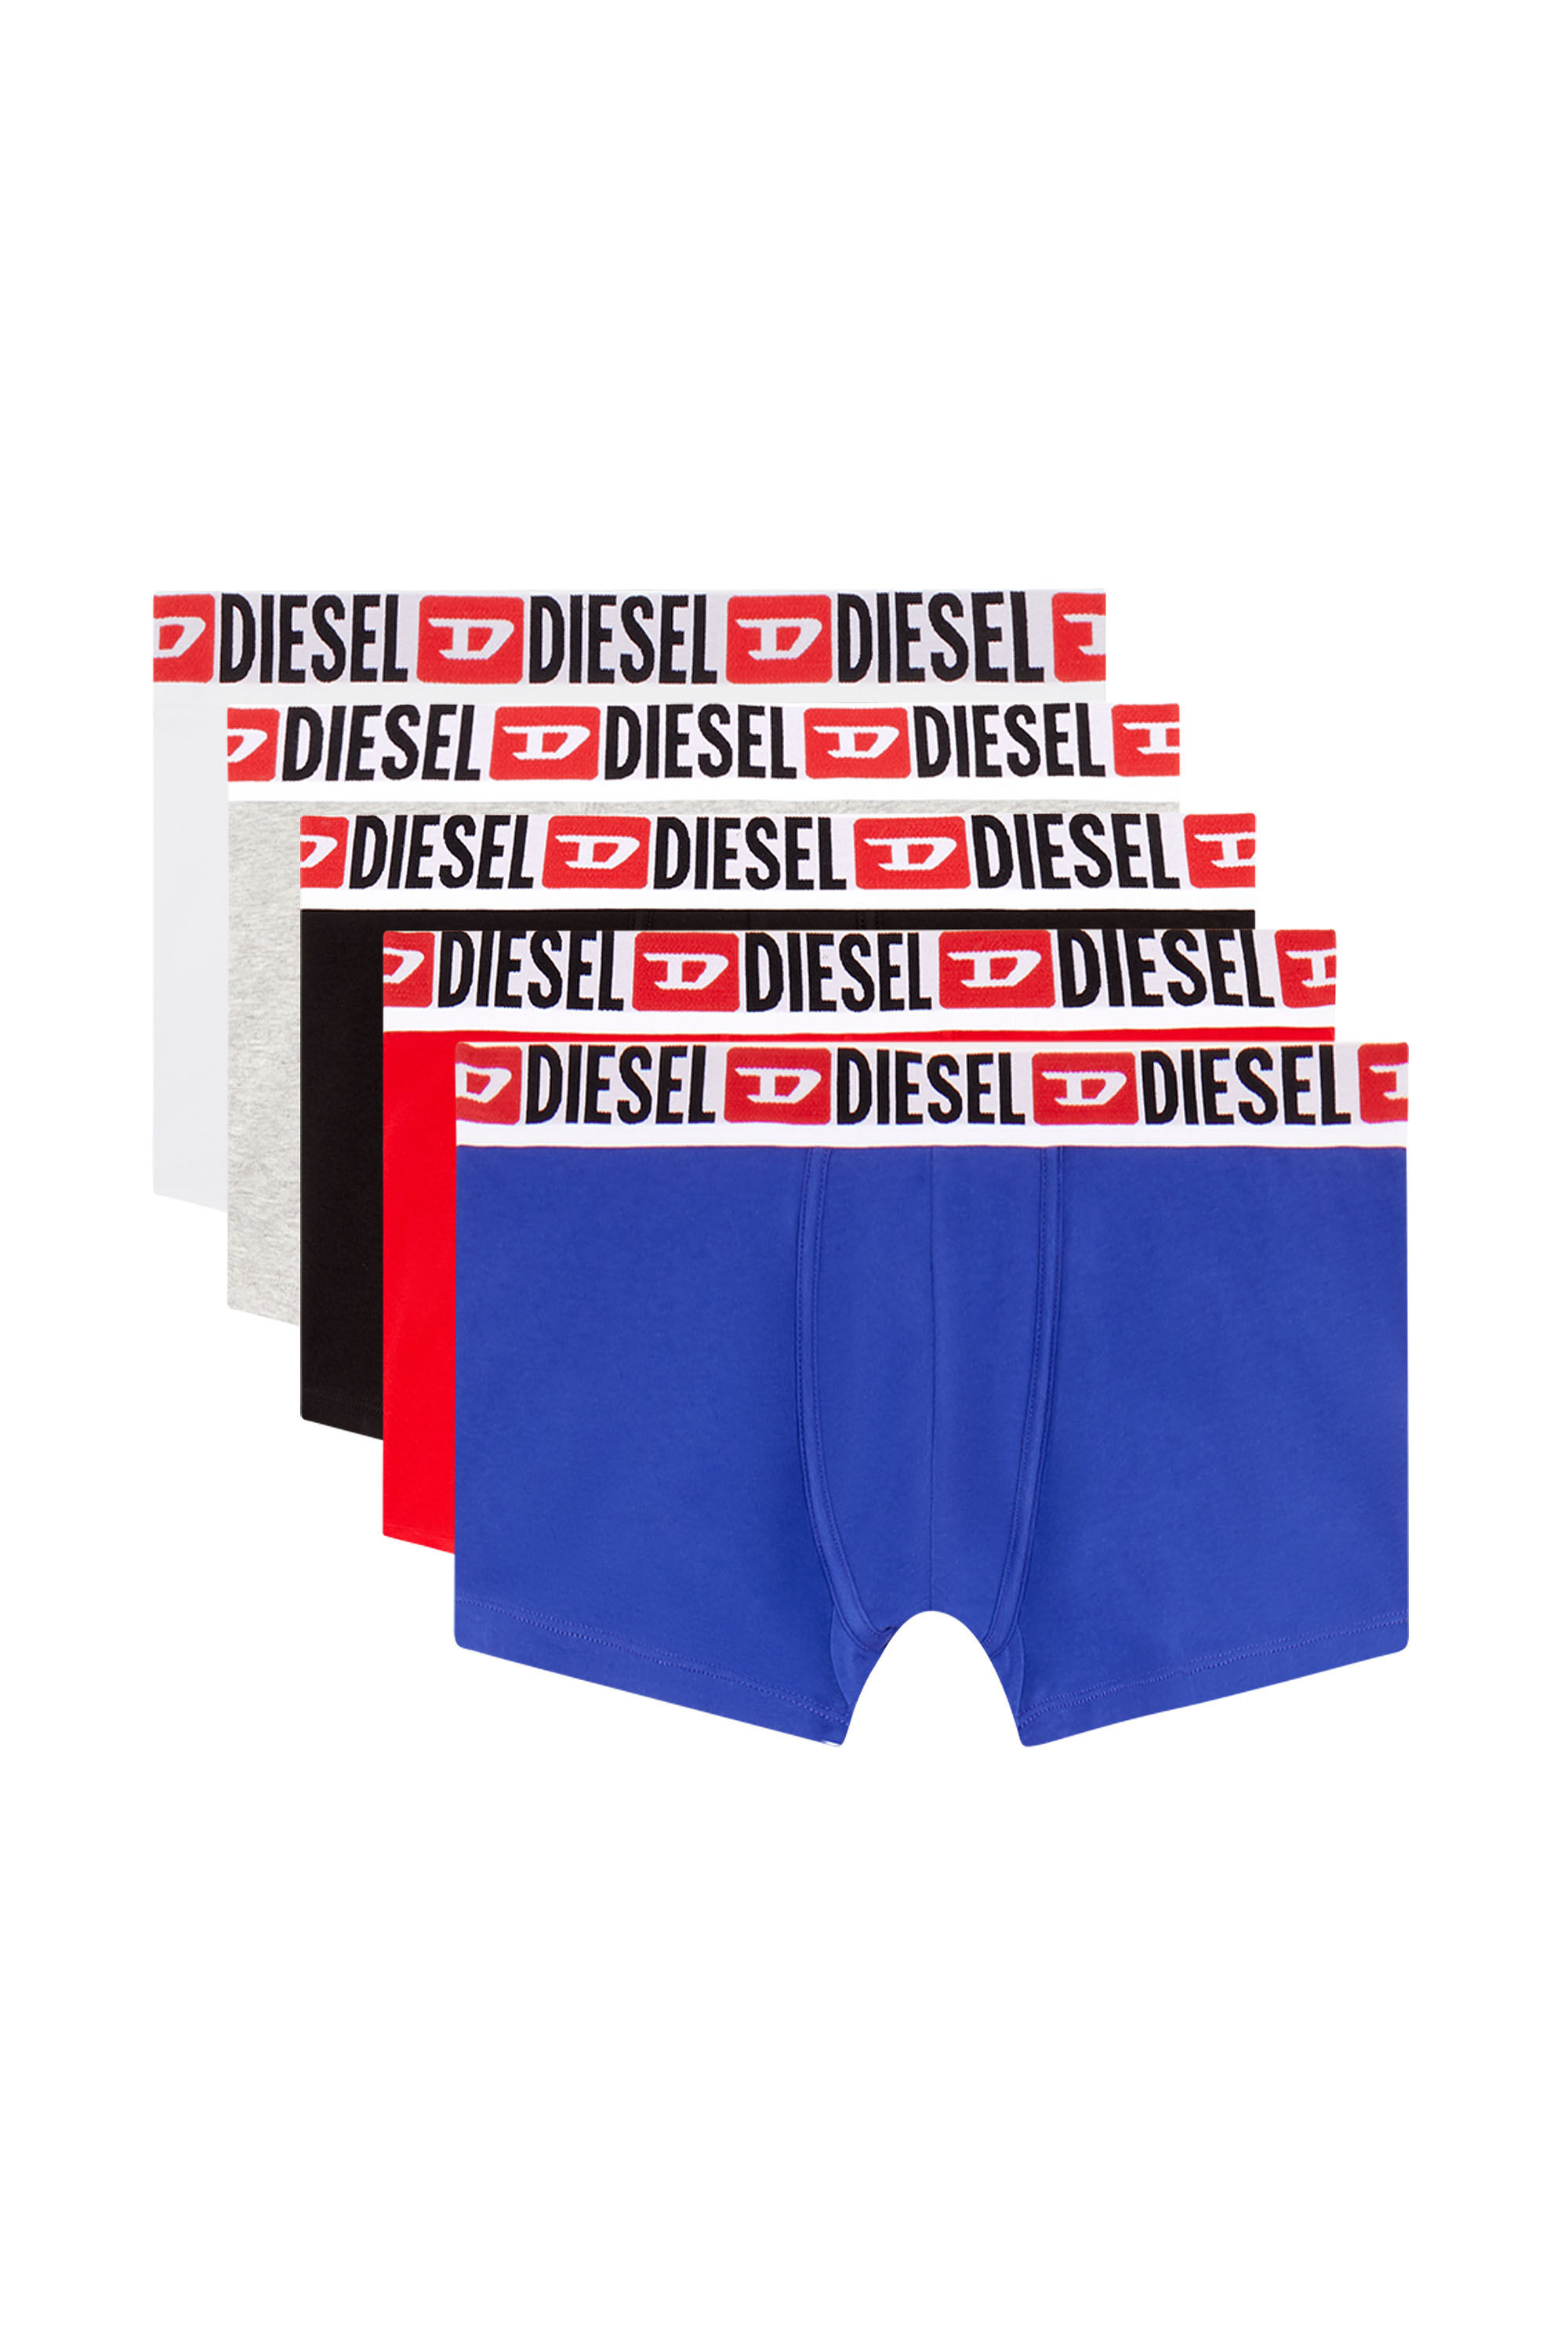 Cotton Stretch and Performance Mixpack Boxer 5-pack - Multi